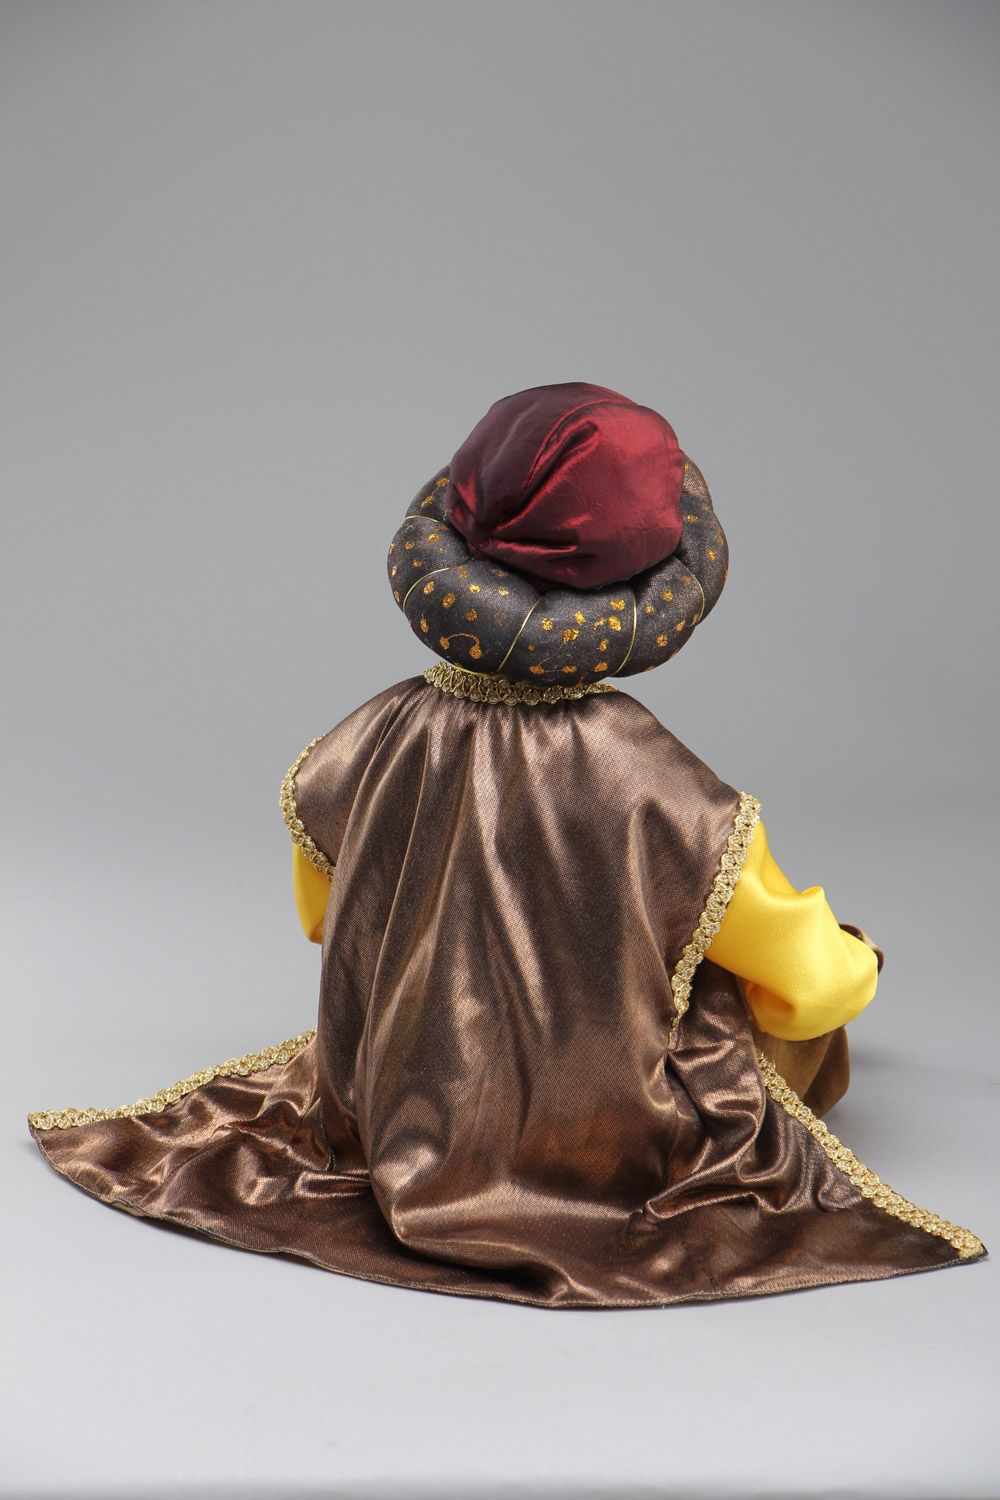 Handmade capron interior doll in the shape of sheikh sculptural textiles photo 4